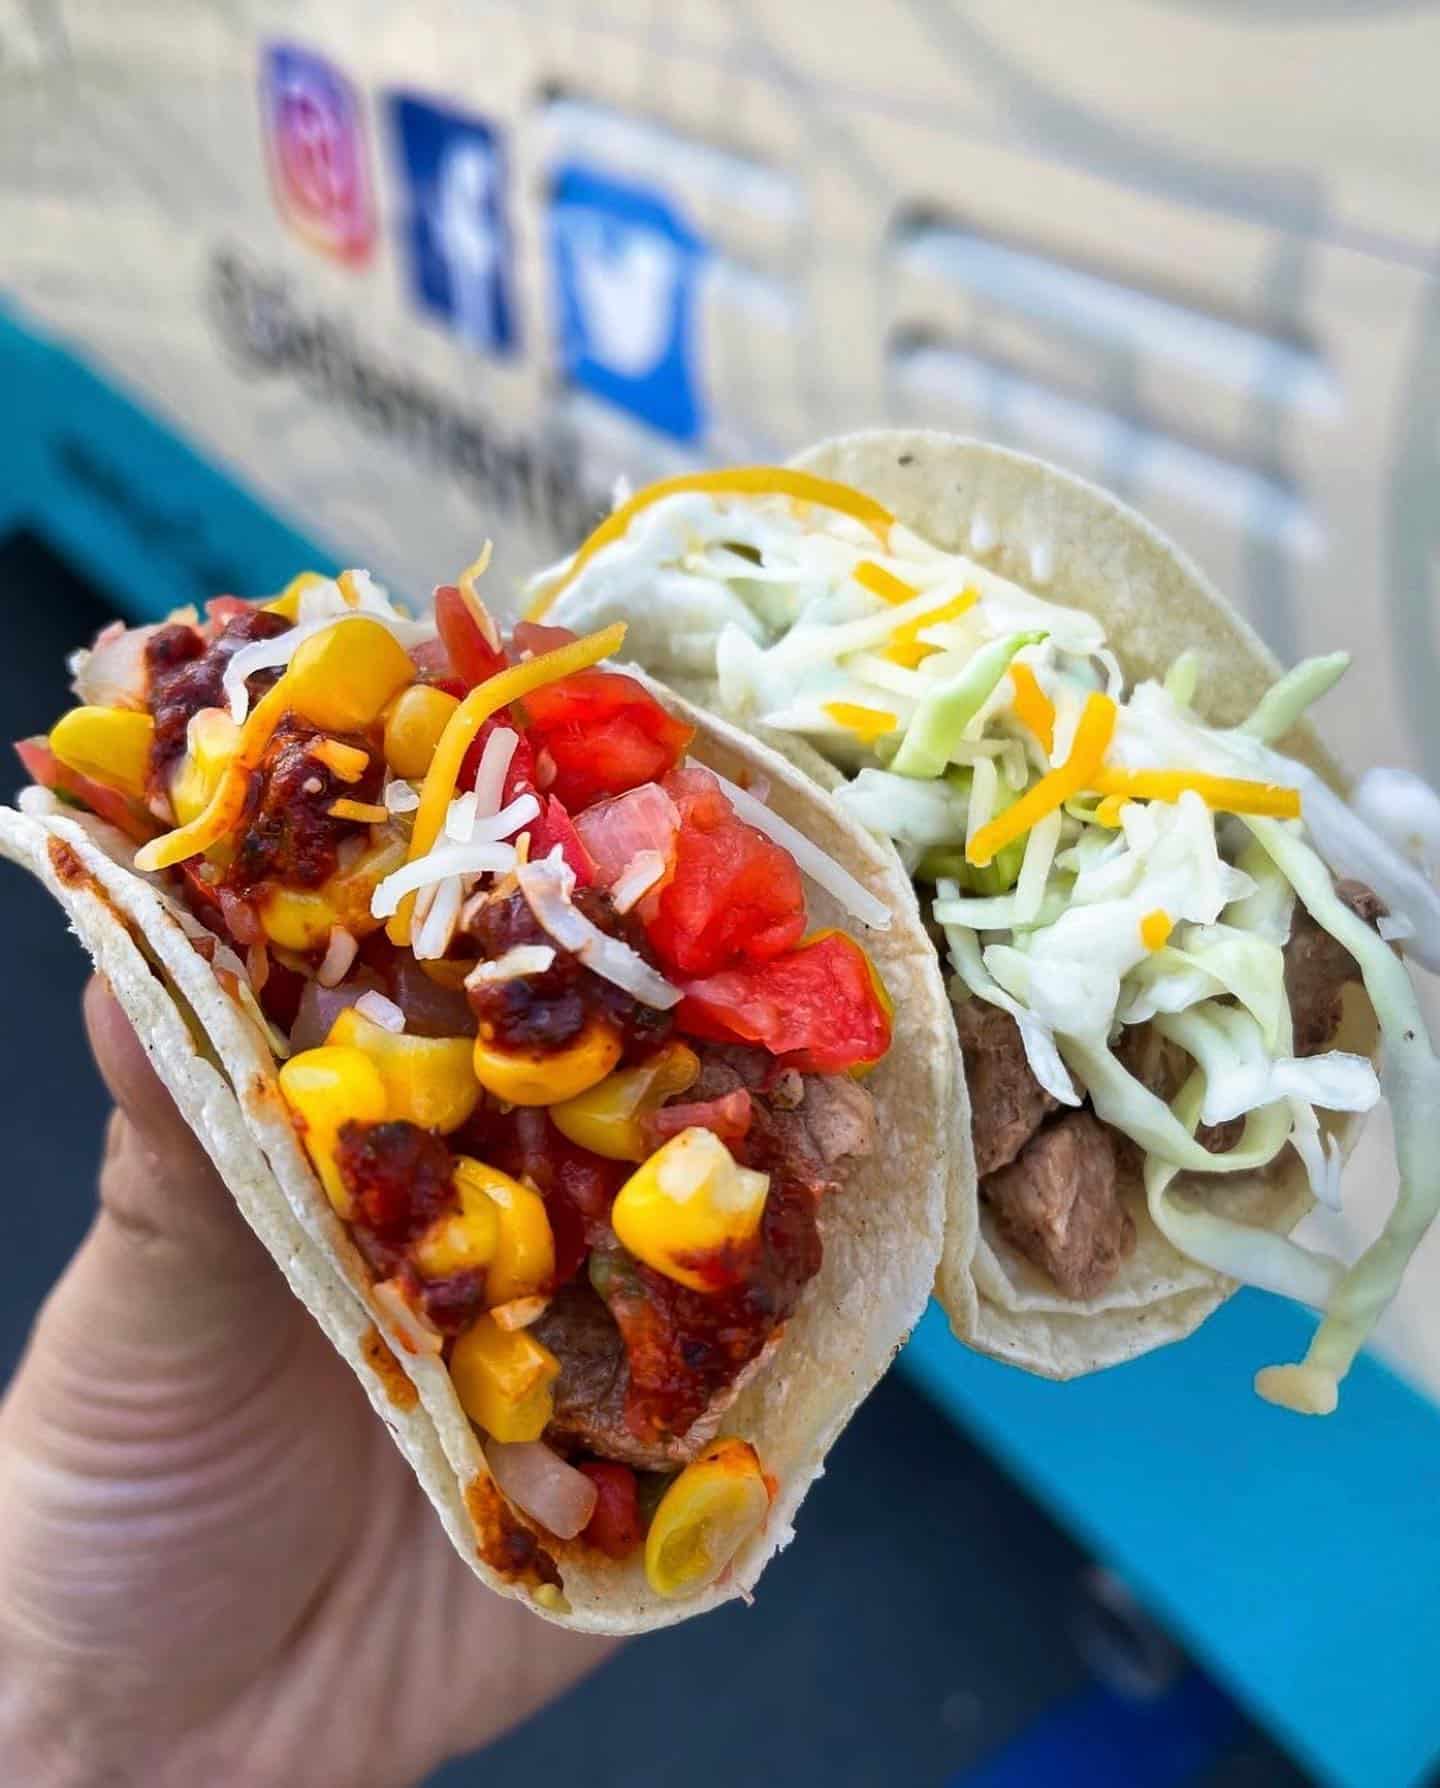 Variety of tacos from 5 elementos food truck